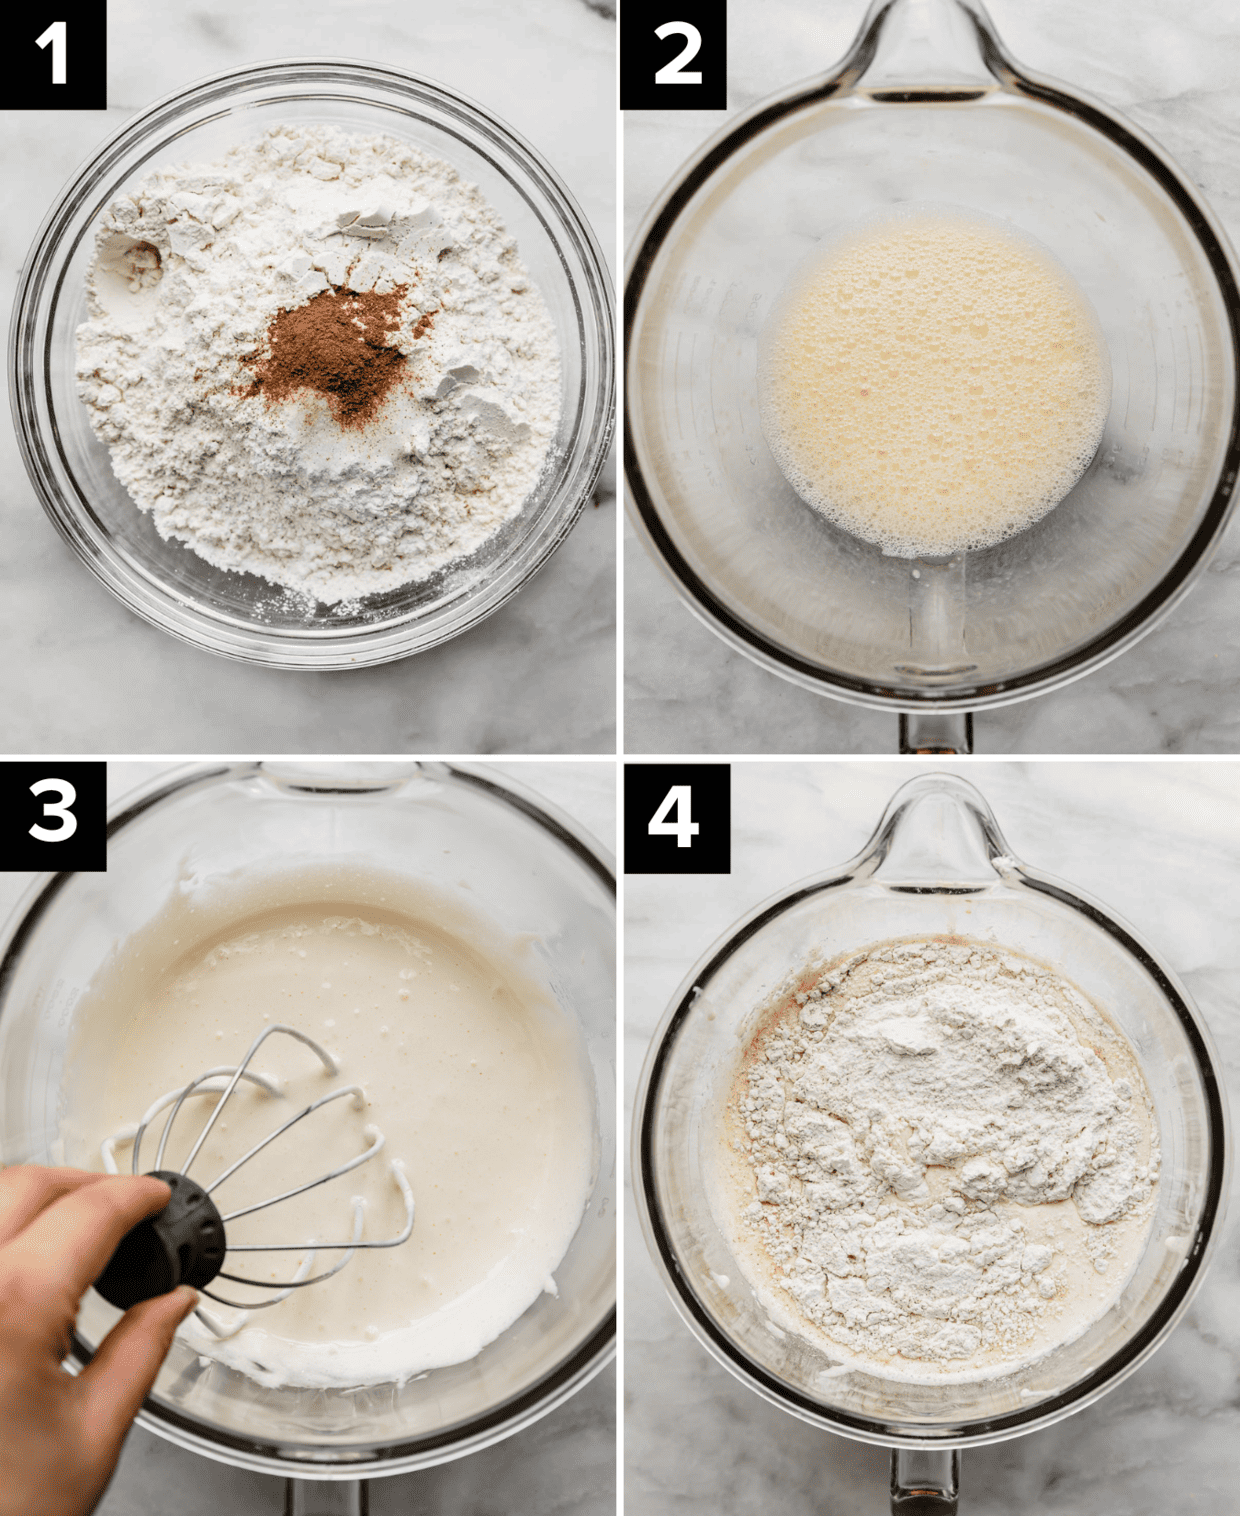 Four photos showing the making of authentic tres leches cake batter with cinnamon in a glass bowl.